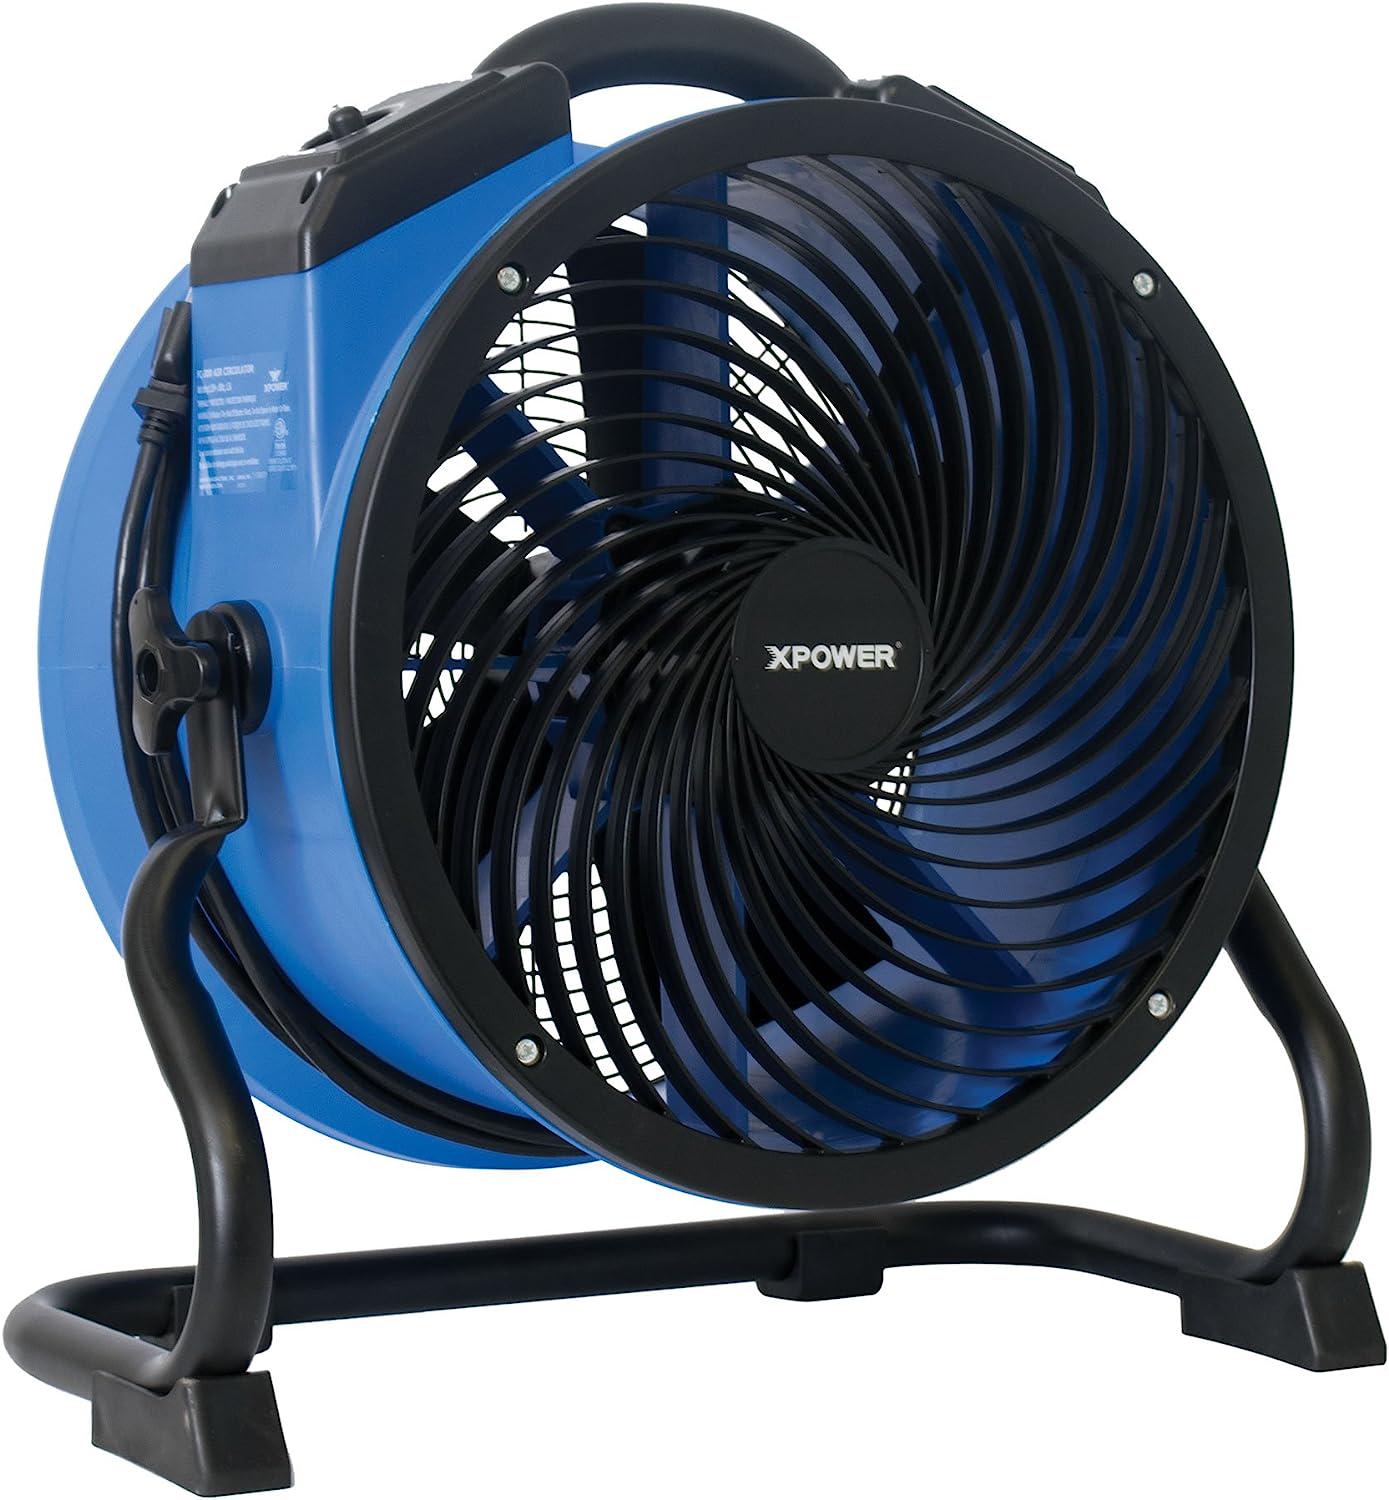 XPOWER FC-300 Heavy Duty Industrial High Velocity Whole Room Air Mover Air Circulator Utility Shop Floor Fan, Variable Speed, Timer, 14 inch, 2100 CFM, Black, Blue-